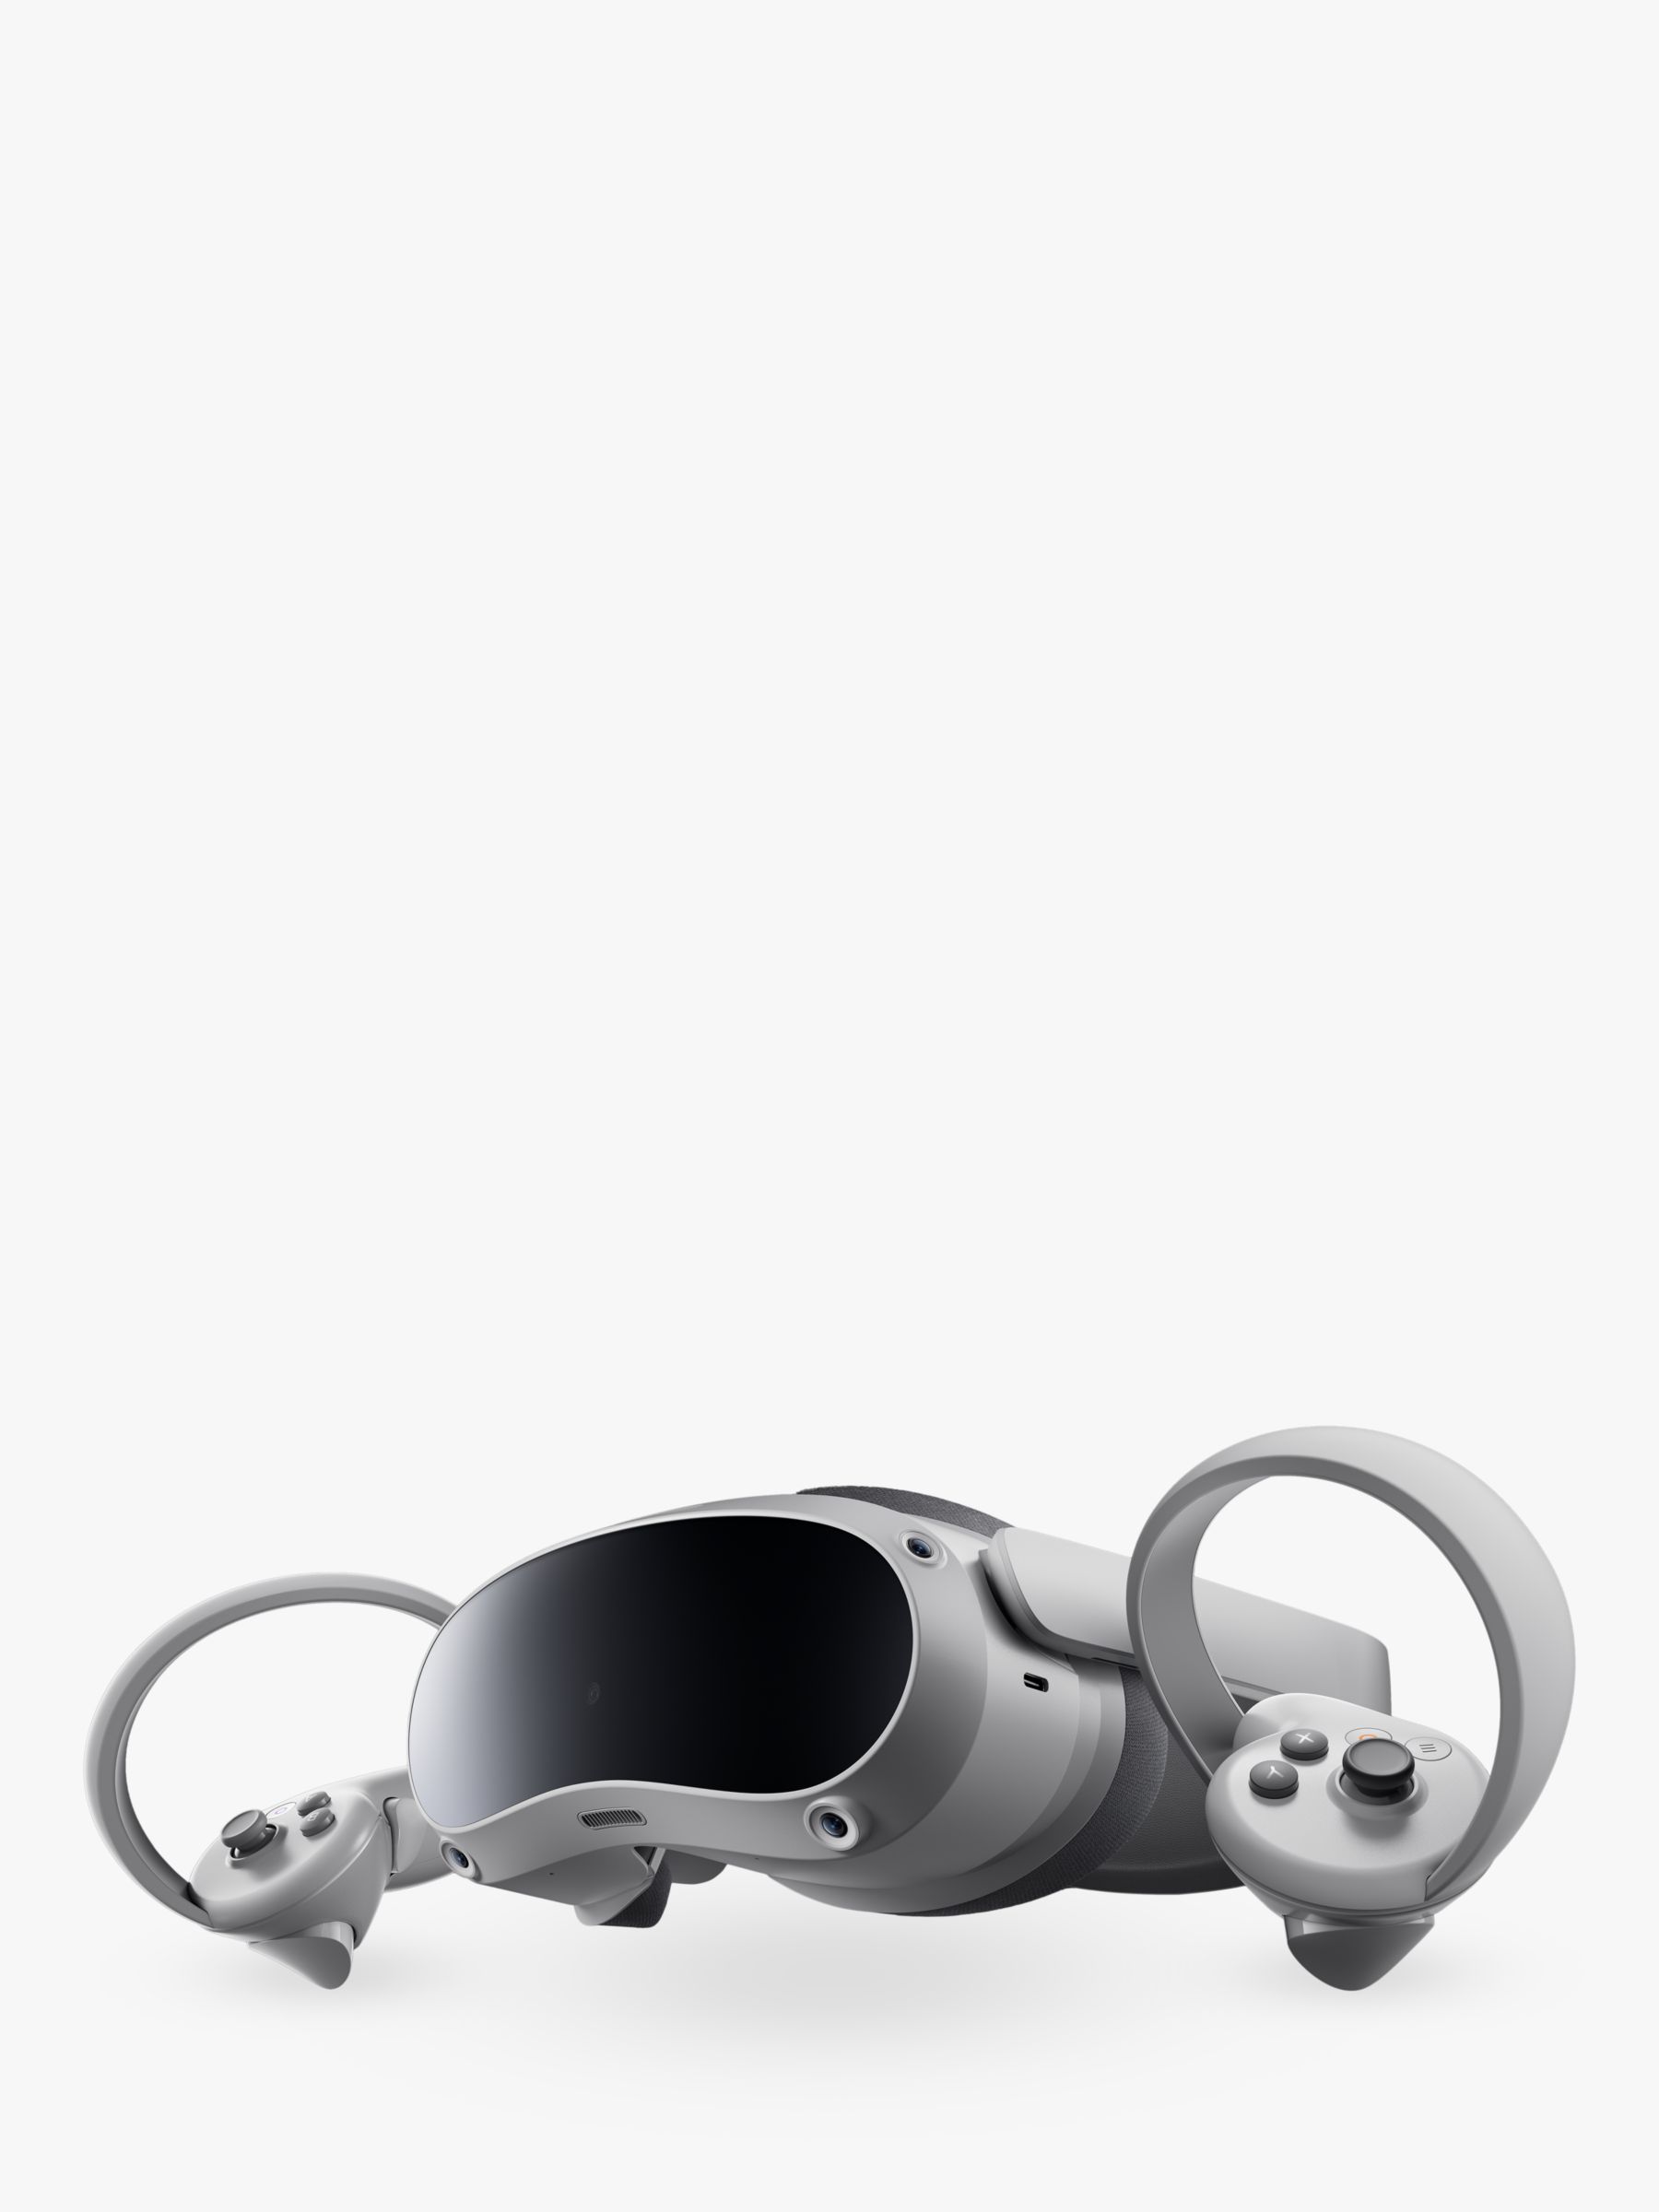 Pico 4 All-In-One Virtual Reality Headset and Controllers, 256GB